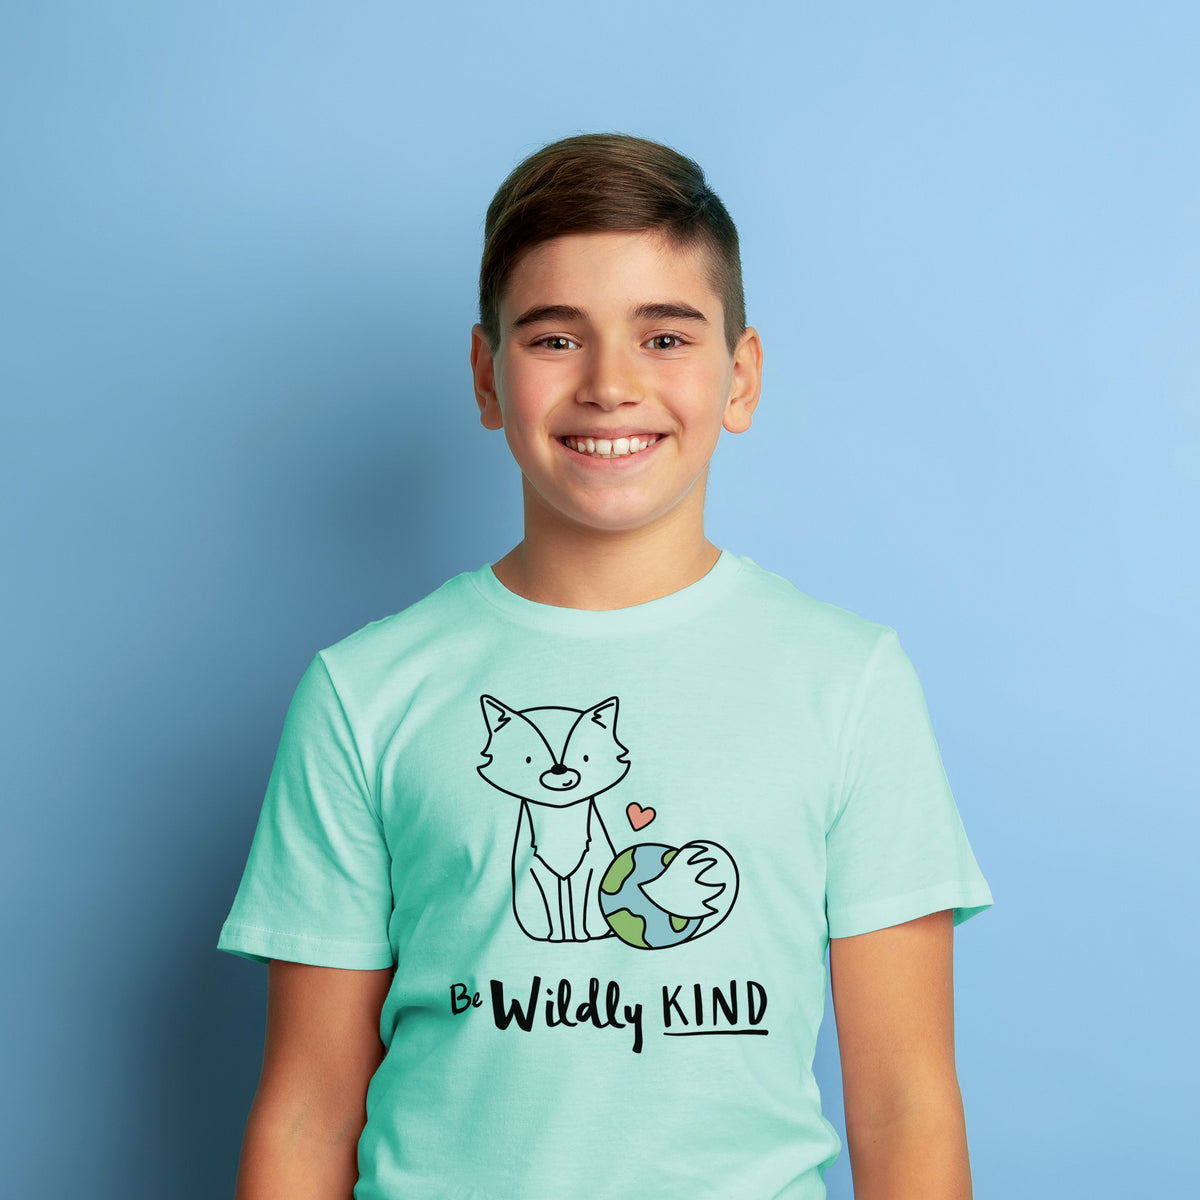 Wildly Tasty Gifts - Kids T-shirts